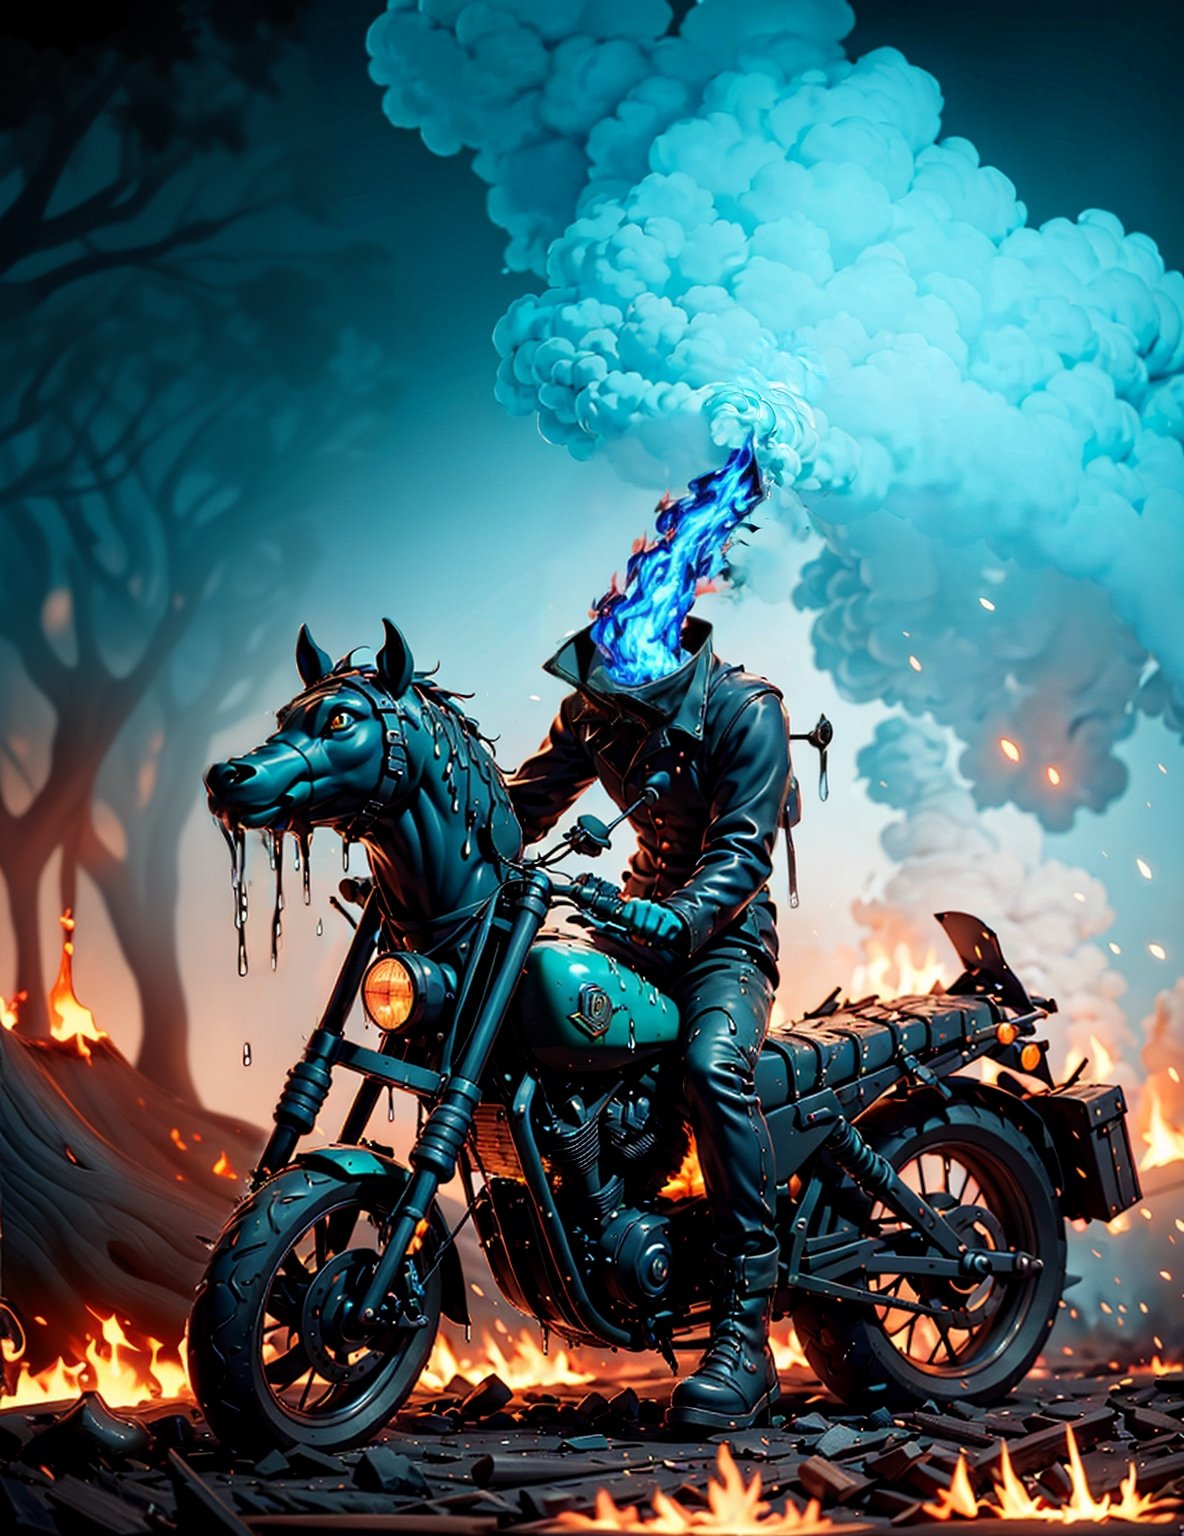 (((a headless horseman))) he rides a burning 1930 Harley Davidson motorcycle down a wooded highway on a dark night. Wearing a leather jacket, cape flapping in the wind, (((No head)))(((decapitated)))(((headless)))(((no helmet)))(((empty neck hole)))(((The motorcycle has the an iron horse head welded to the front, it's eyes serve as headlights))), (holding a machete)

(((Drippy, burnt ember asthetic))), ((gnarly spooky trees)), autumn leaves, (((green fog))), crescent moon, ((charred drippy trees))

(((an iron horse head is welded on to the front of motorcycle, (rider has no head, he is decapitated, he is headless), ))), halloweentech, art by Stephen Gammell, fire that looks like..., HellAI, horror, human on fire,DisembodiedHead,human on fire,horror